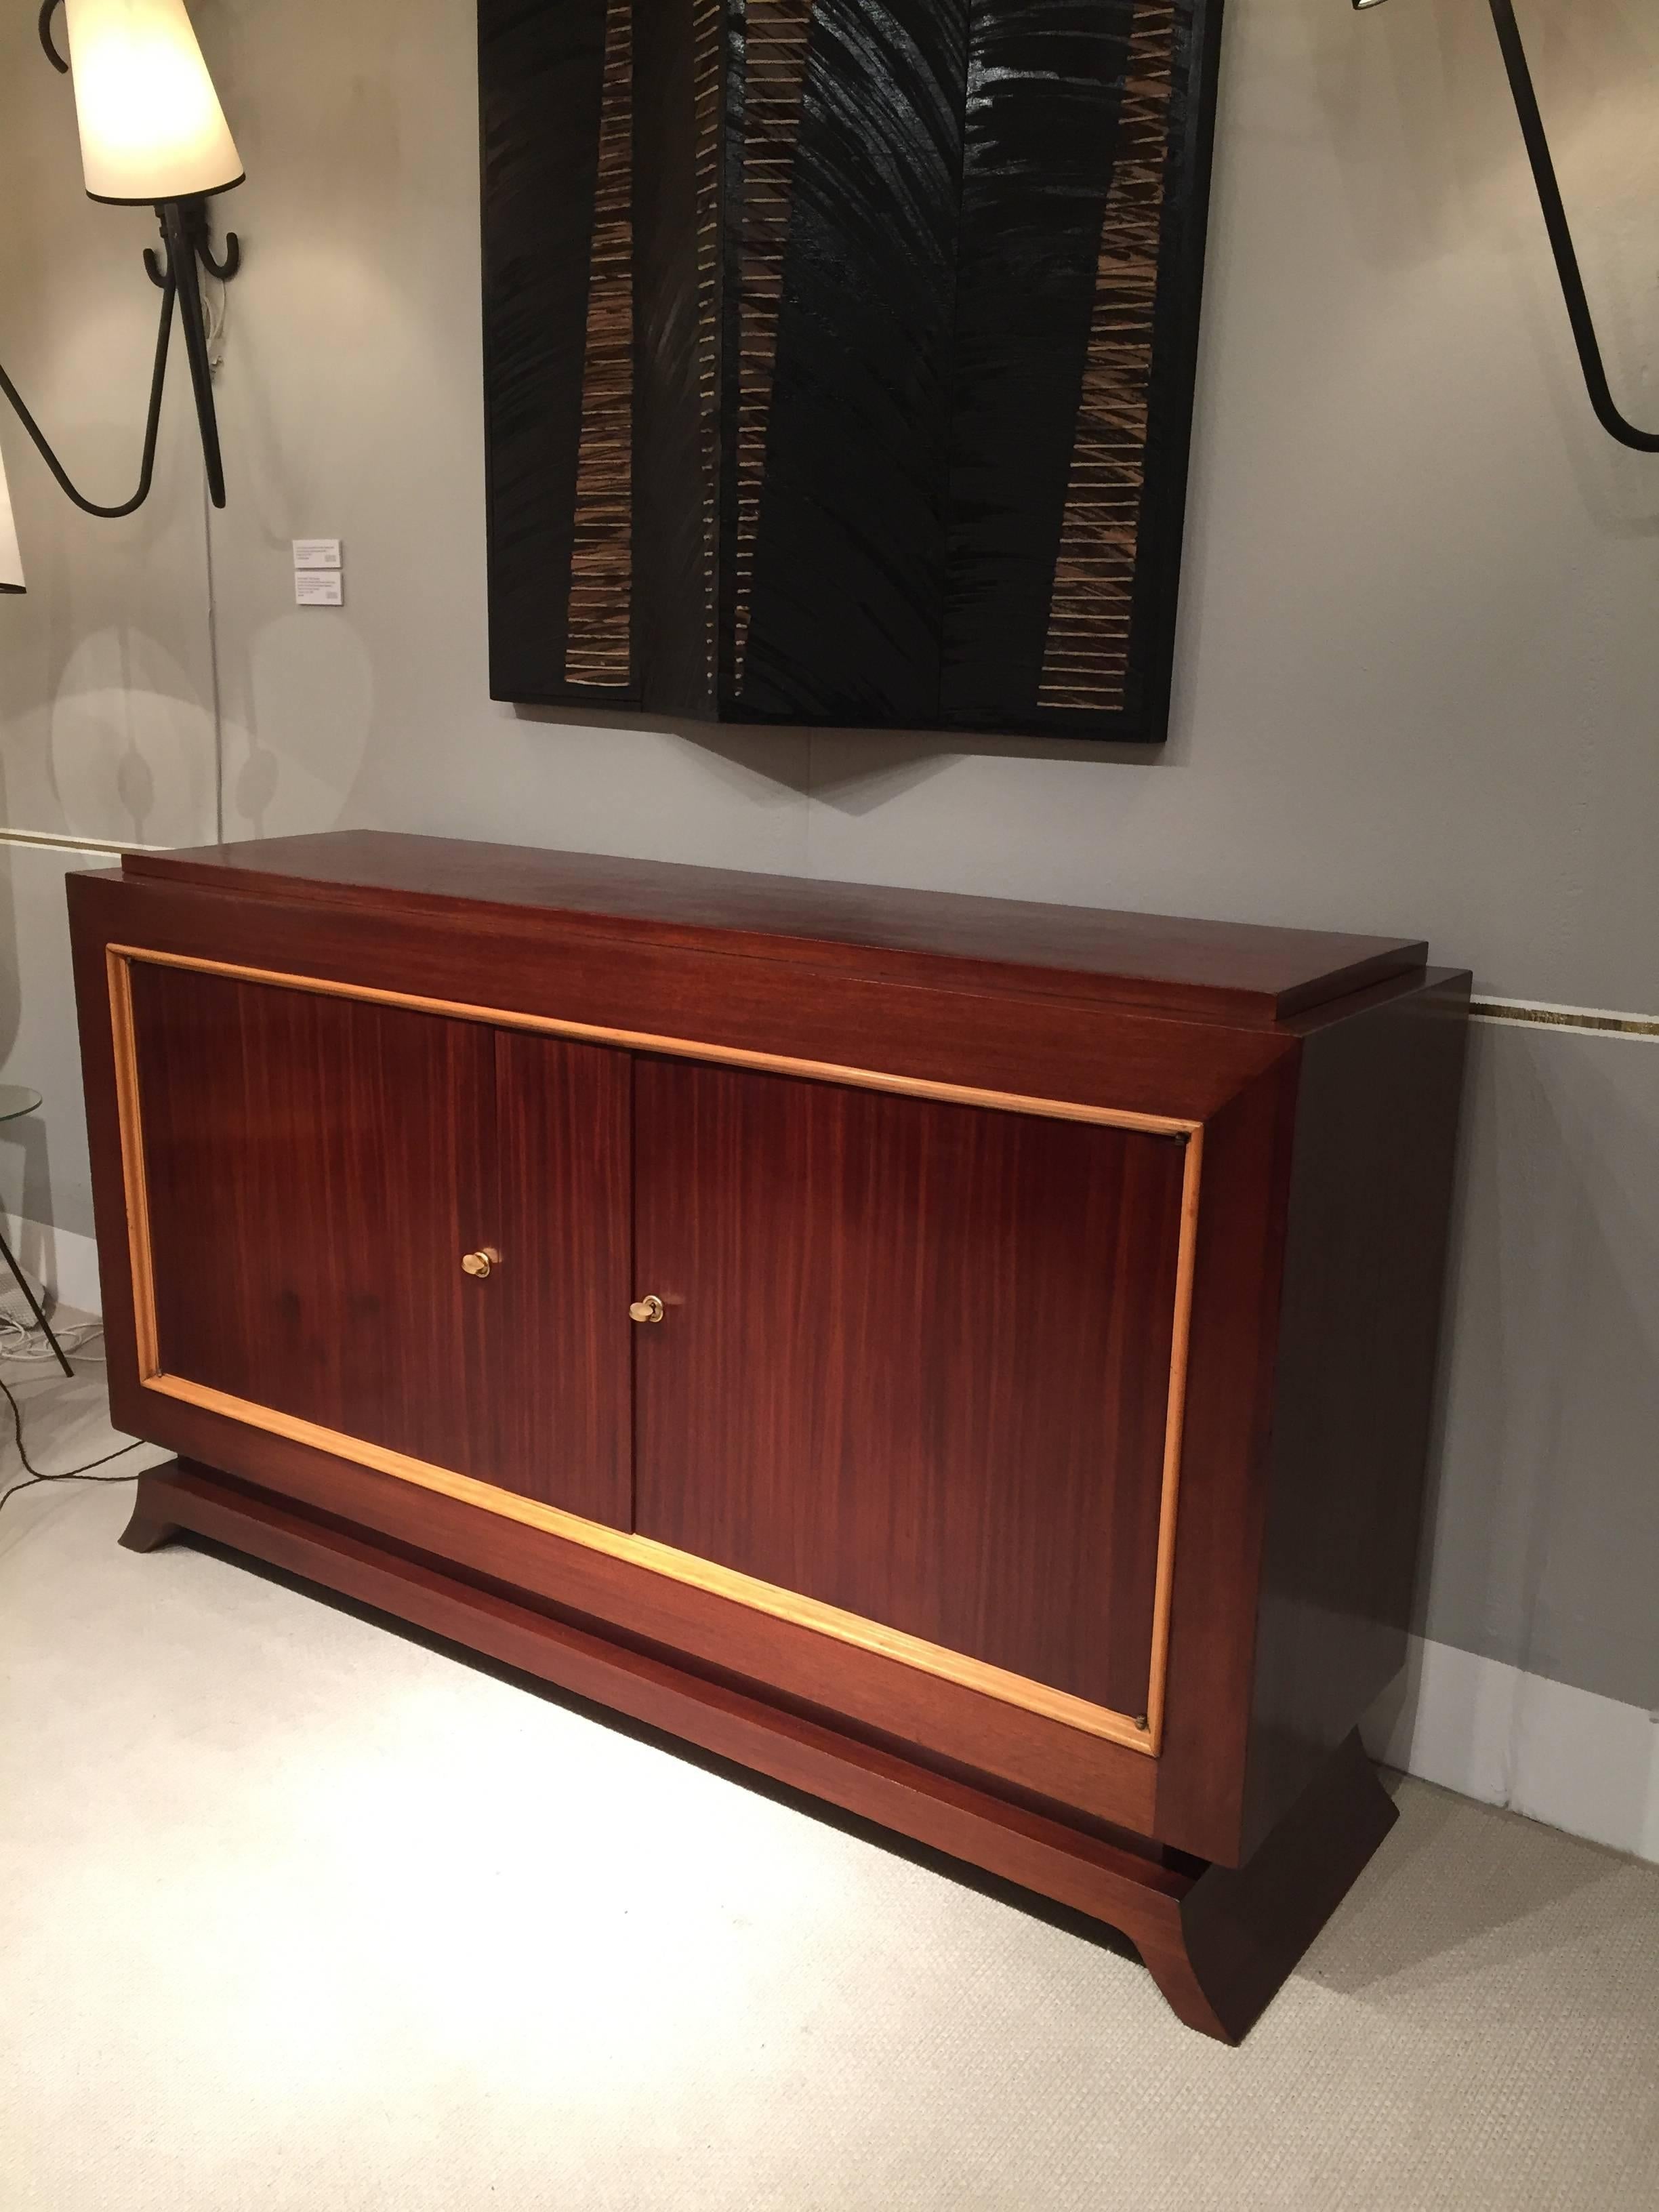 An important mahogany and sycamore sideboard, opening with two door with brass key holes and keys, with 'gradin' stepped top, on recessed base and arched feet. The interior fitted in mahogany and oak, with a central shelf.
France, circa